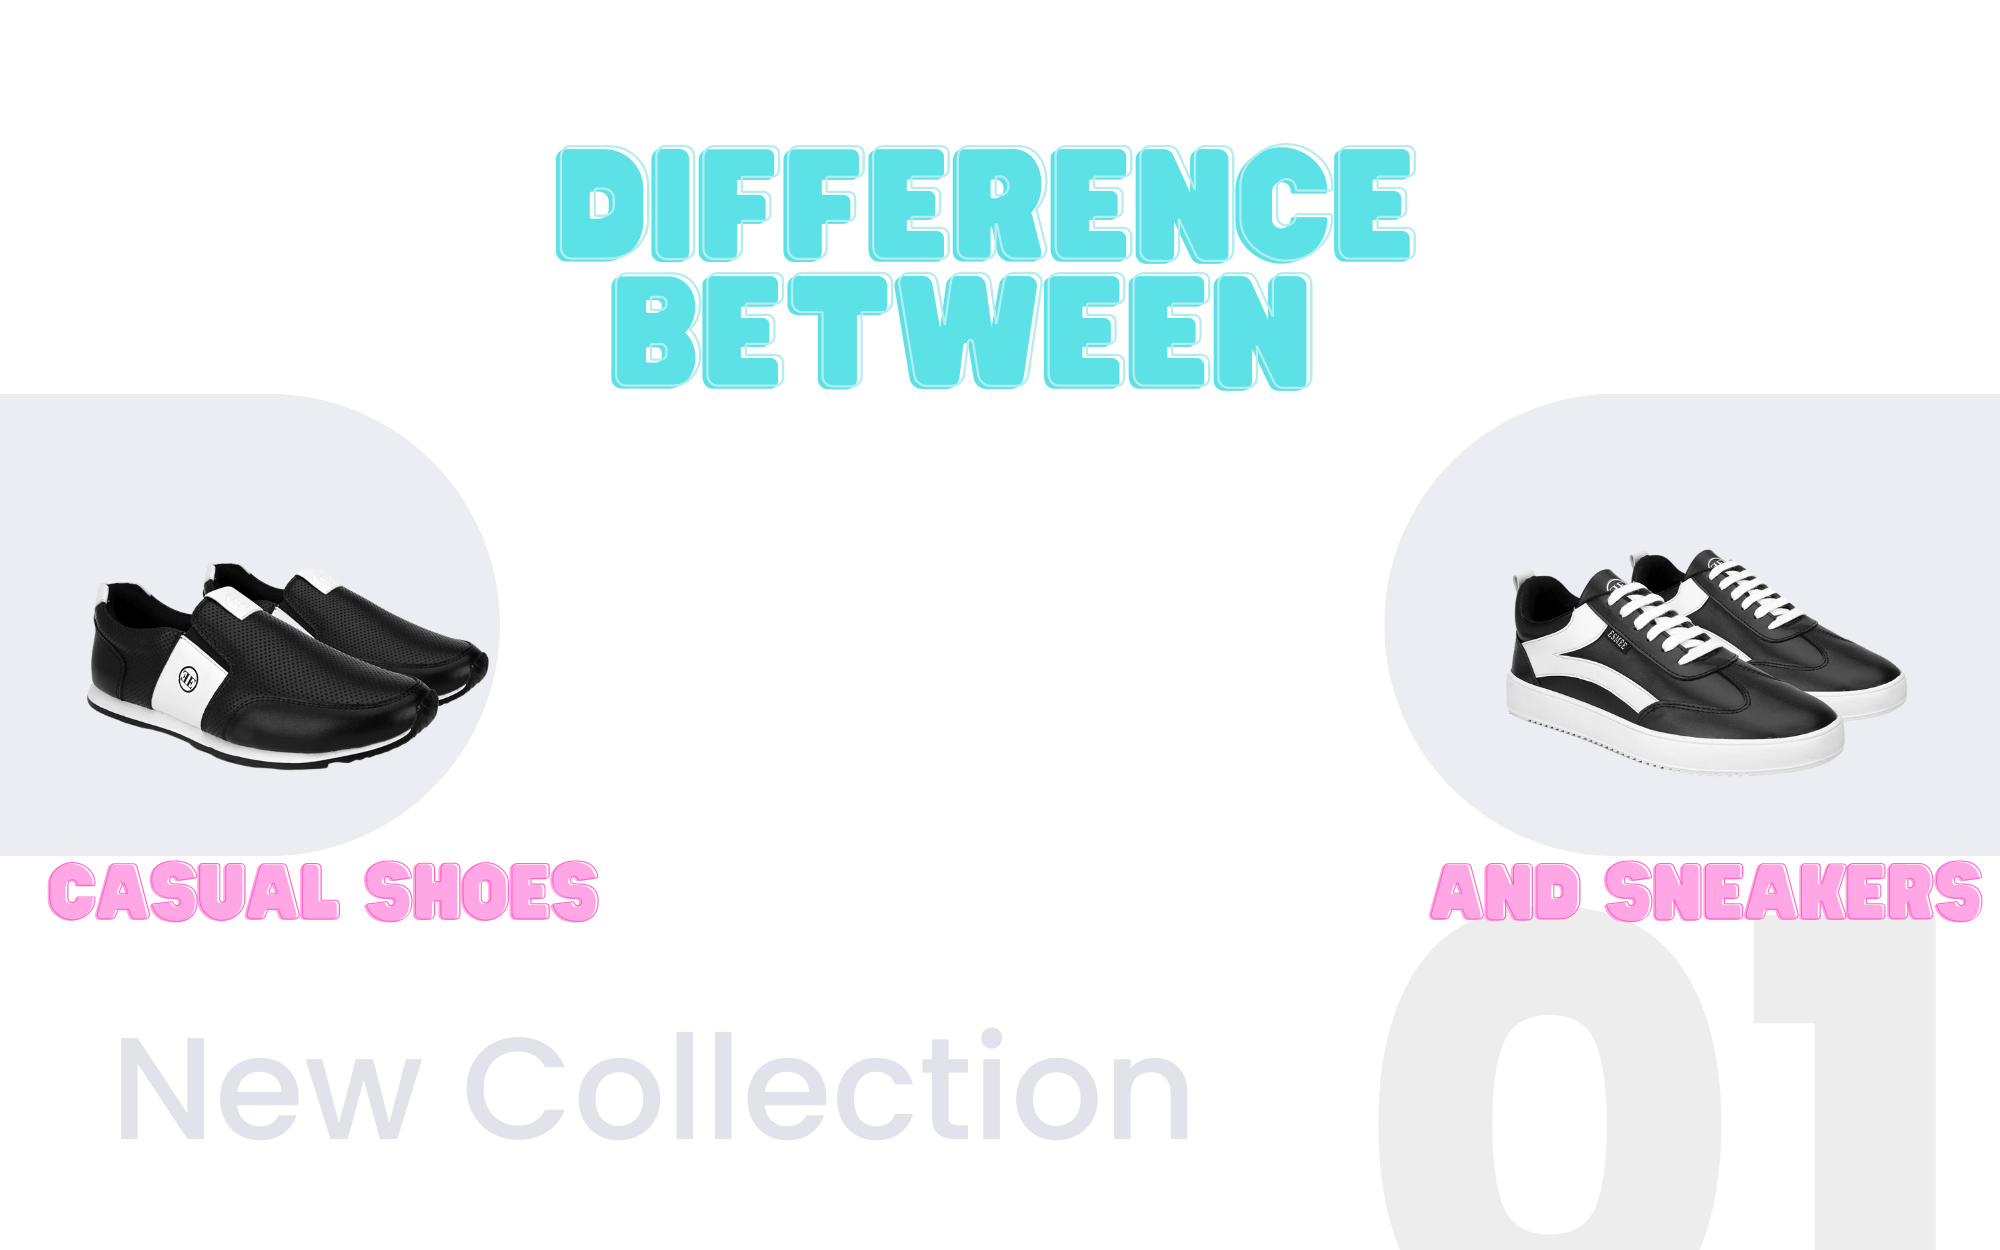 Difference between casual shoes and sneakers